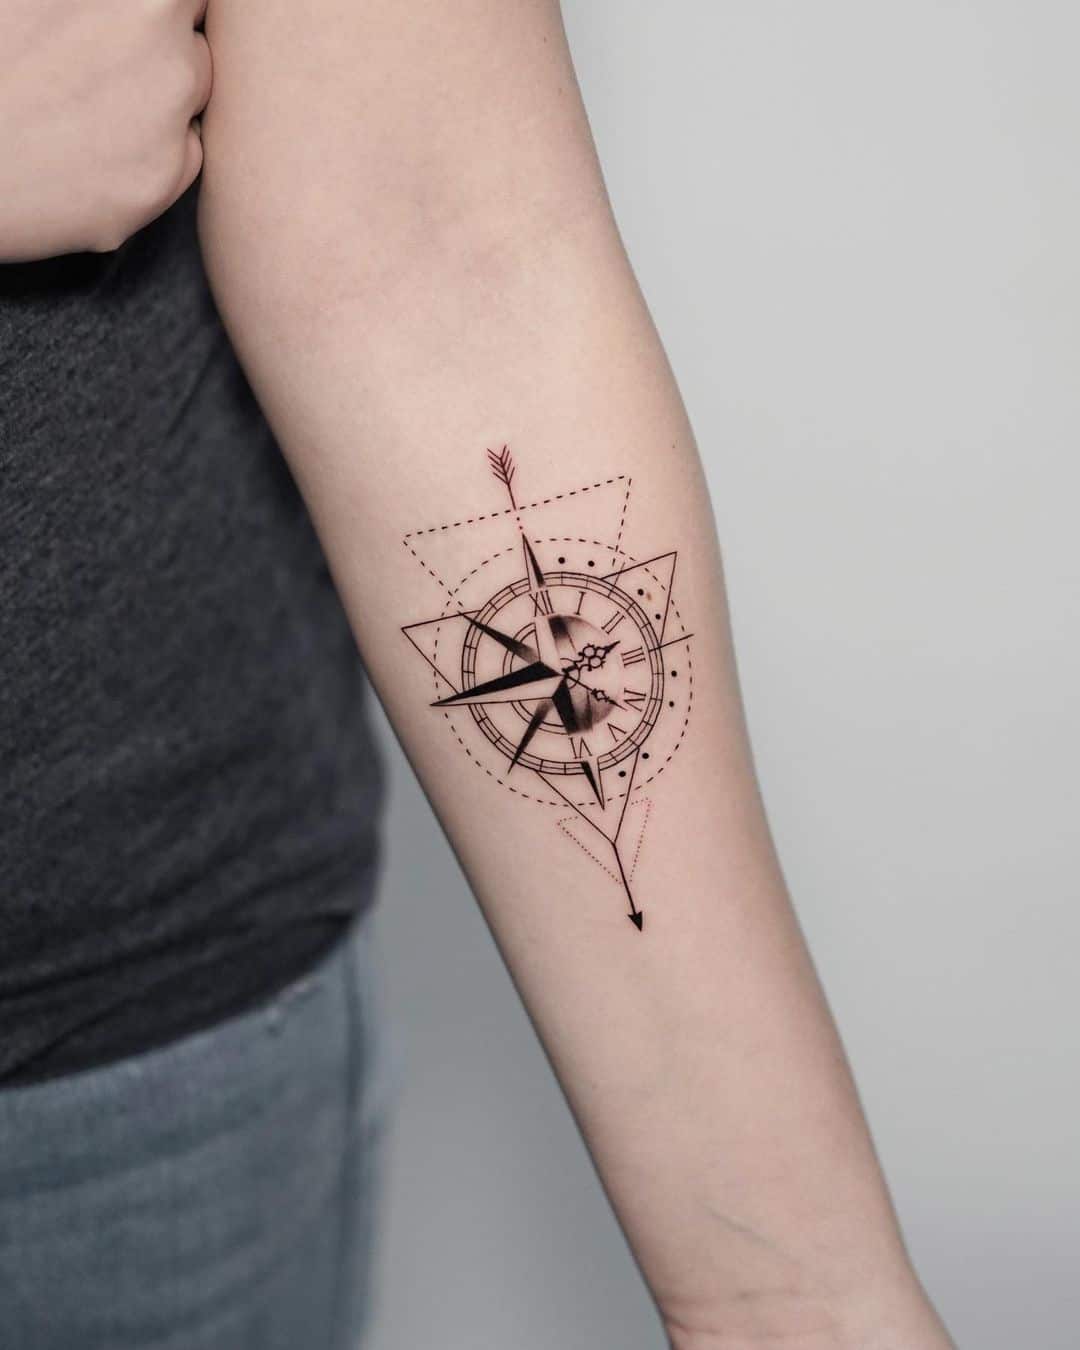 Compass tattoo on lower arm by blindreasontattoo